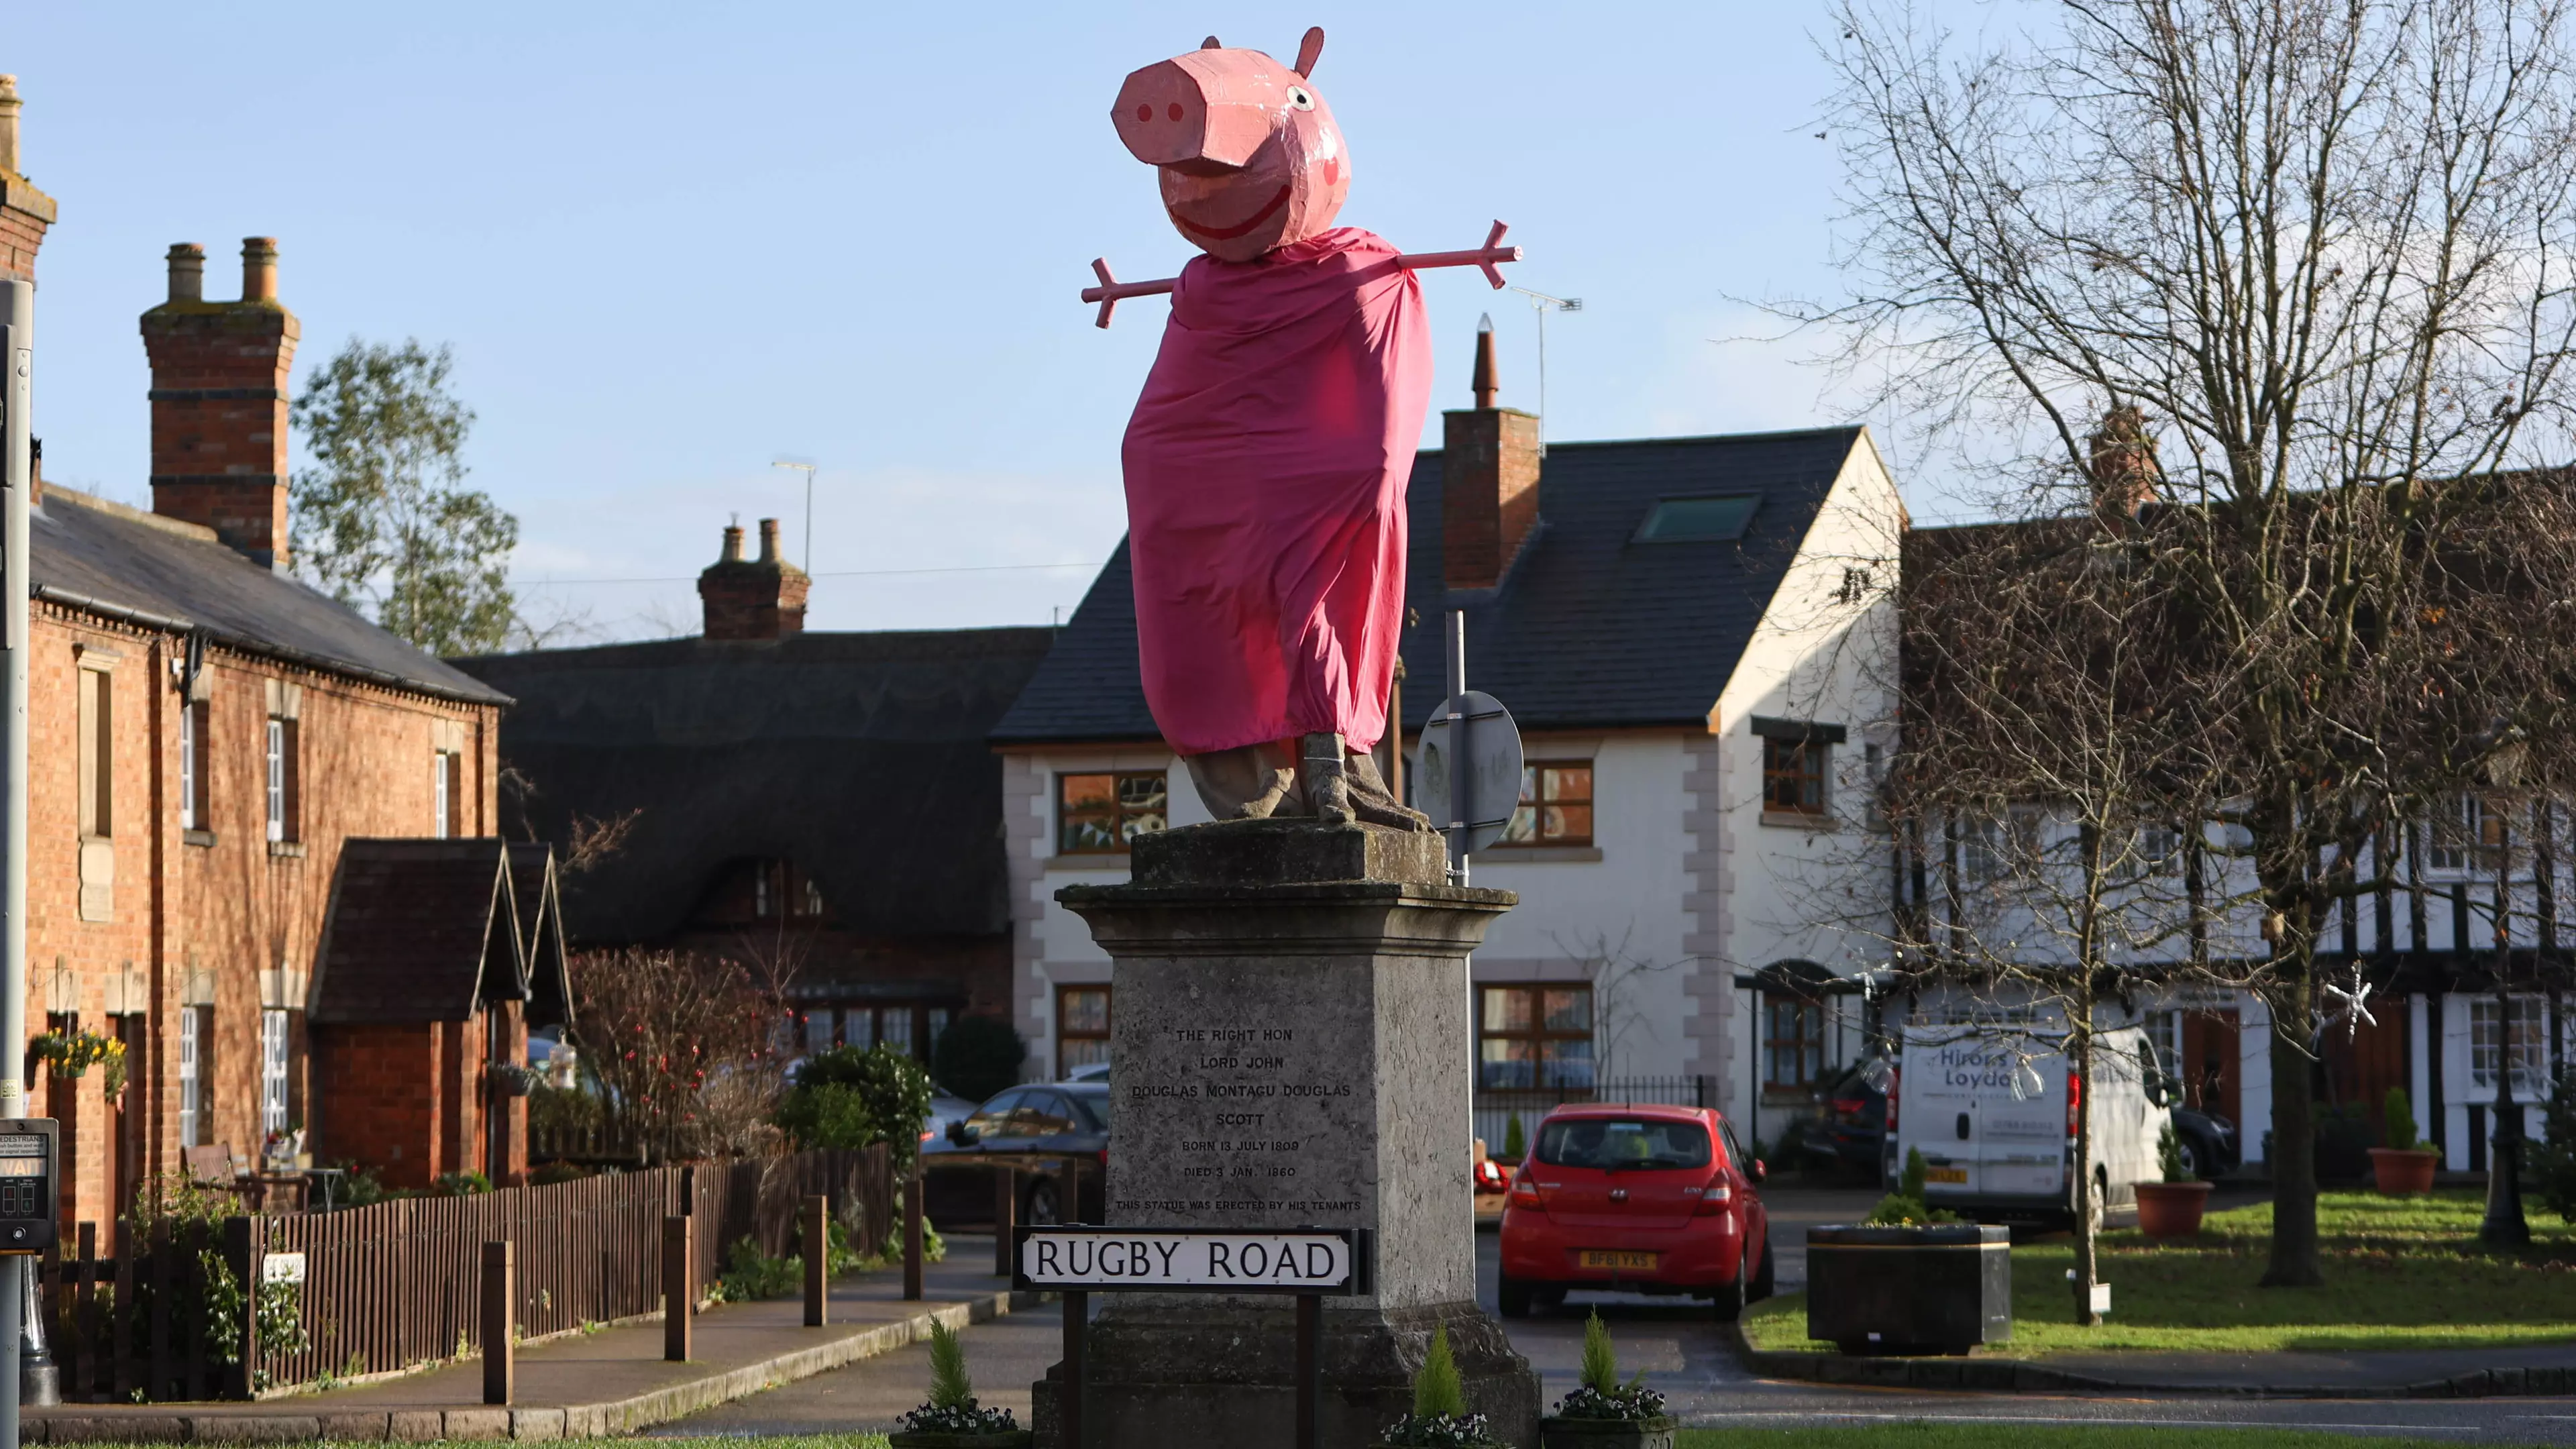 Residents Left Baffled After Town Statue Is Turned Into Giant Peppa Pig